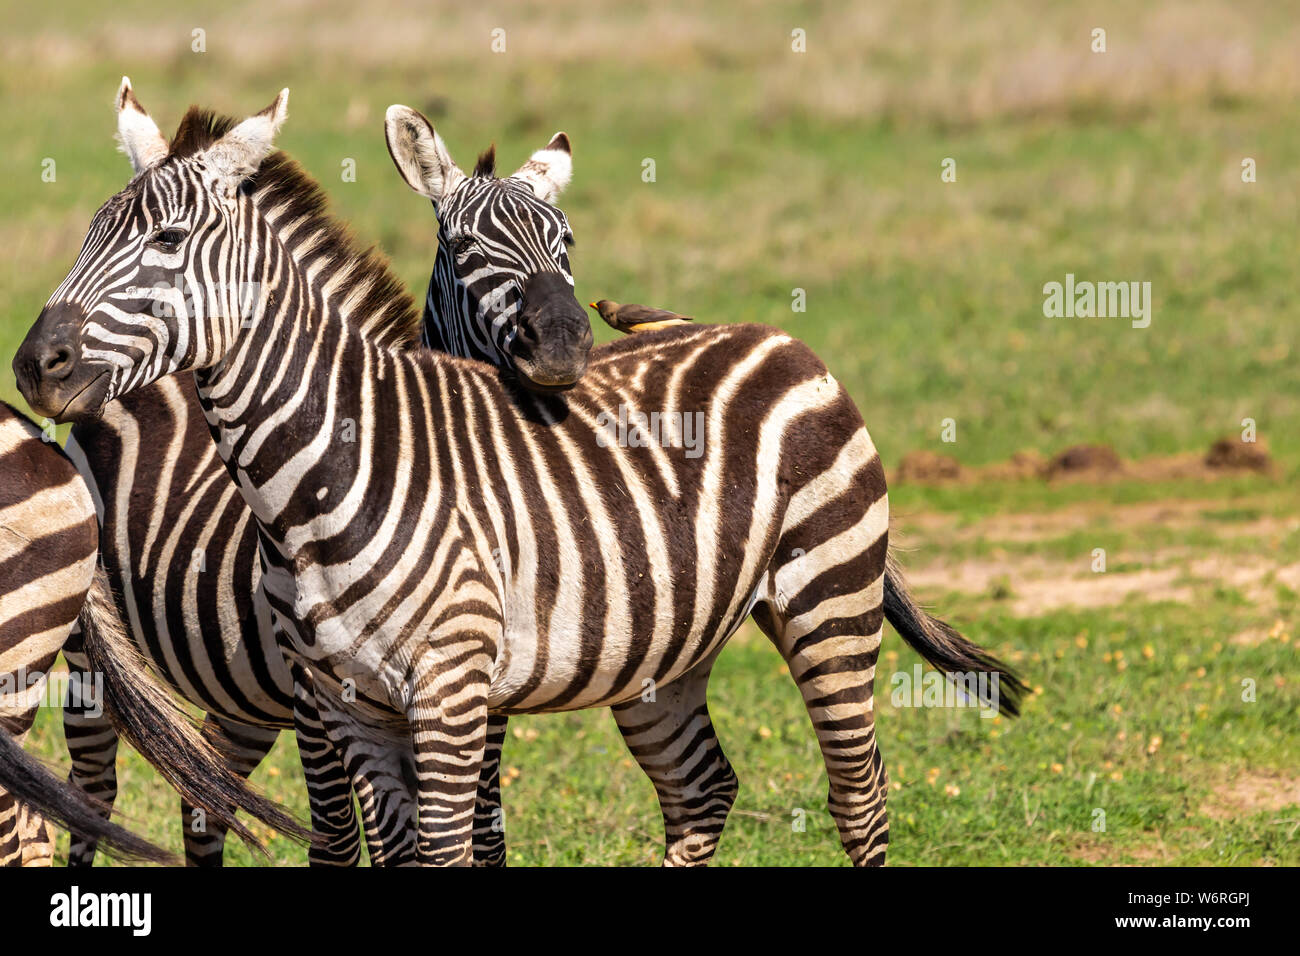 Colour wildlife portrait of two Burchell’s Zebra with one Zebra resting its head on the back of the other, taken on Ol Pejeta conservancy, Kenya. Stock Photo